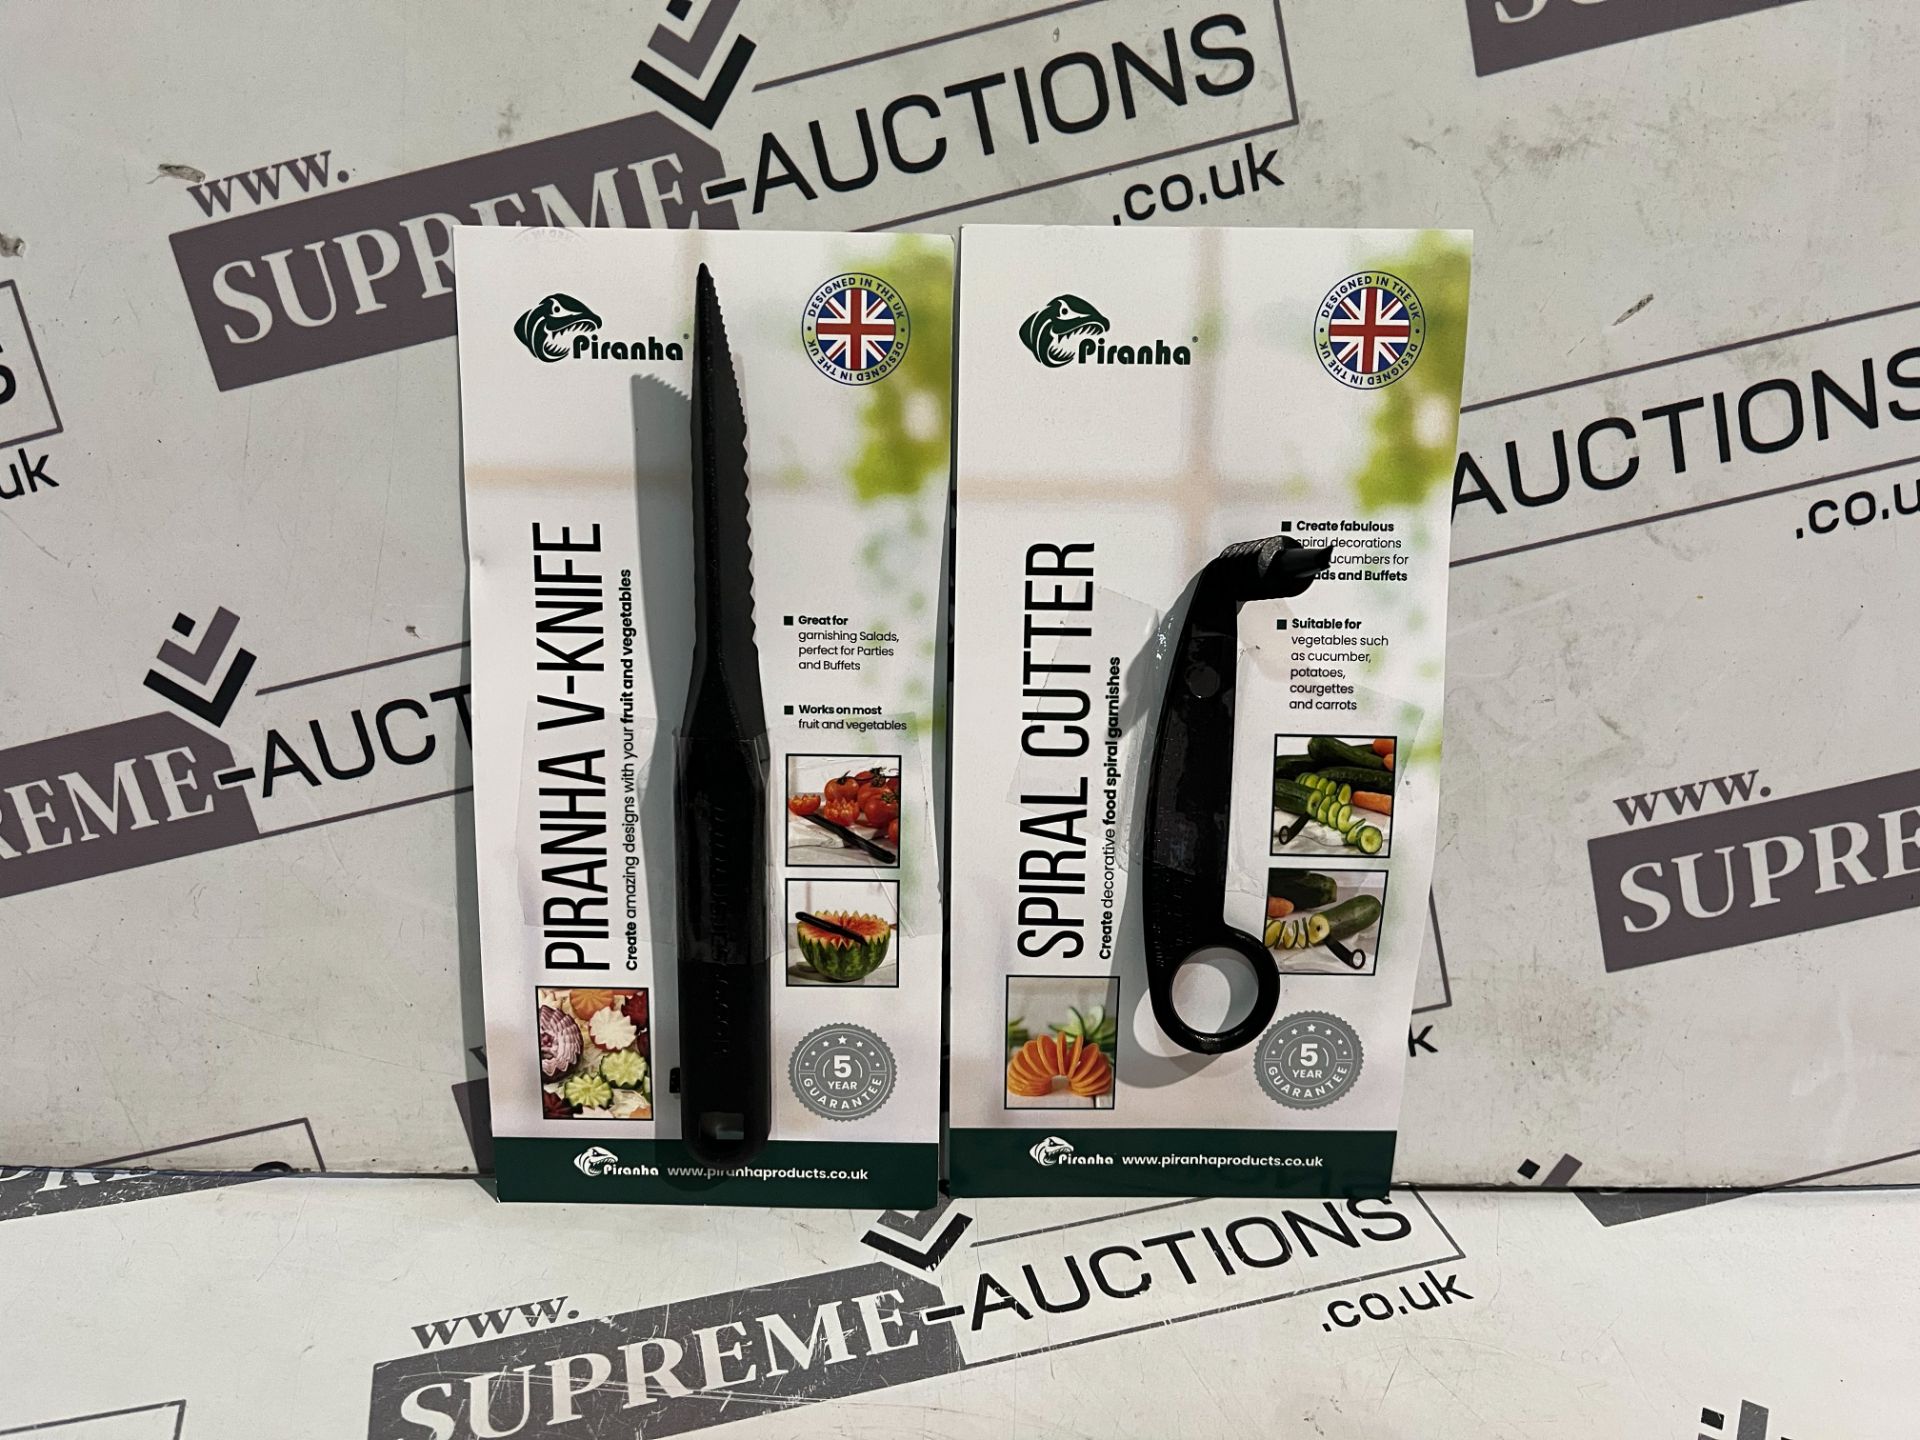 24 X BRAND NEW SETS OF 2 PIRANHA KITCHEN ACCESSORIES INCLUDING SPIRAL CUTTER AND PIRANHA V KNIVES